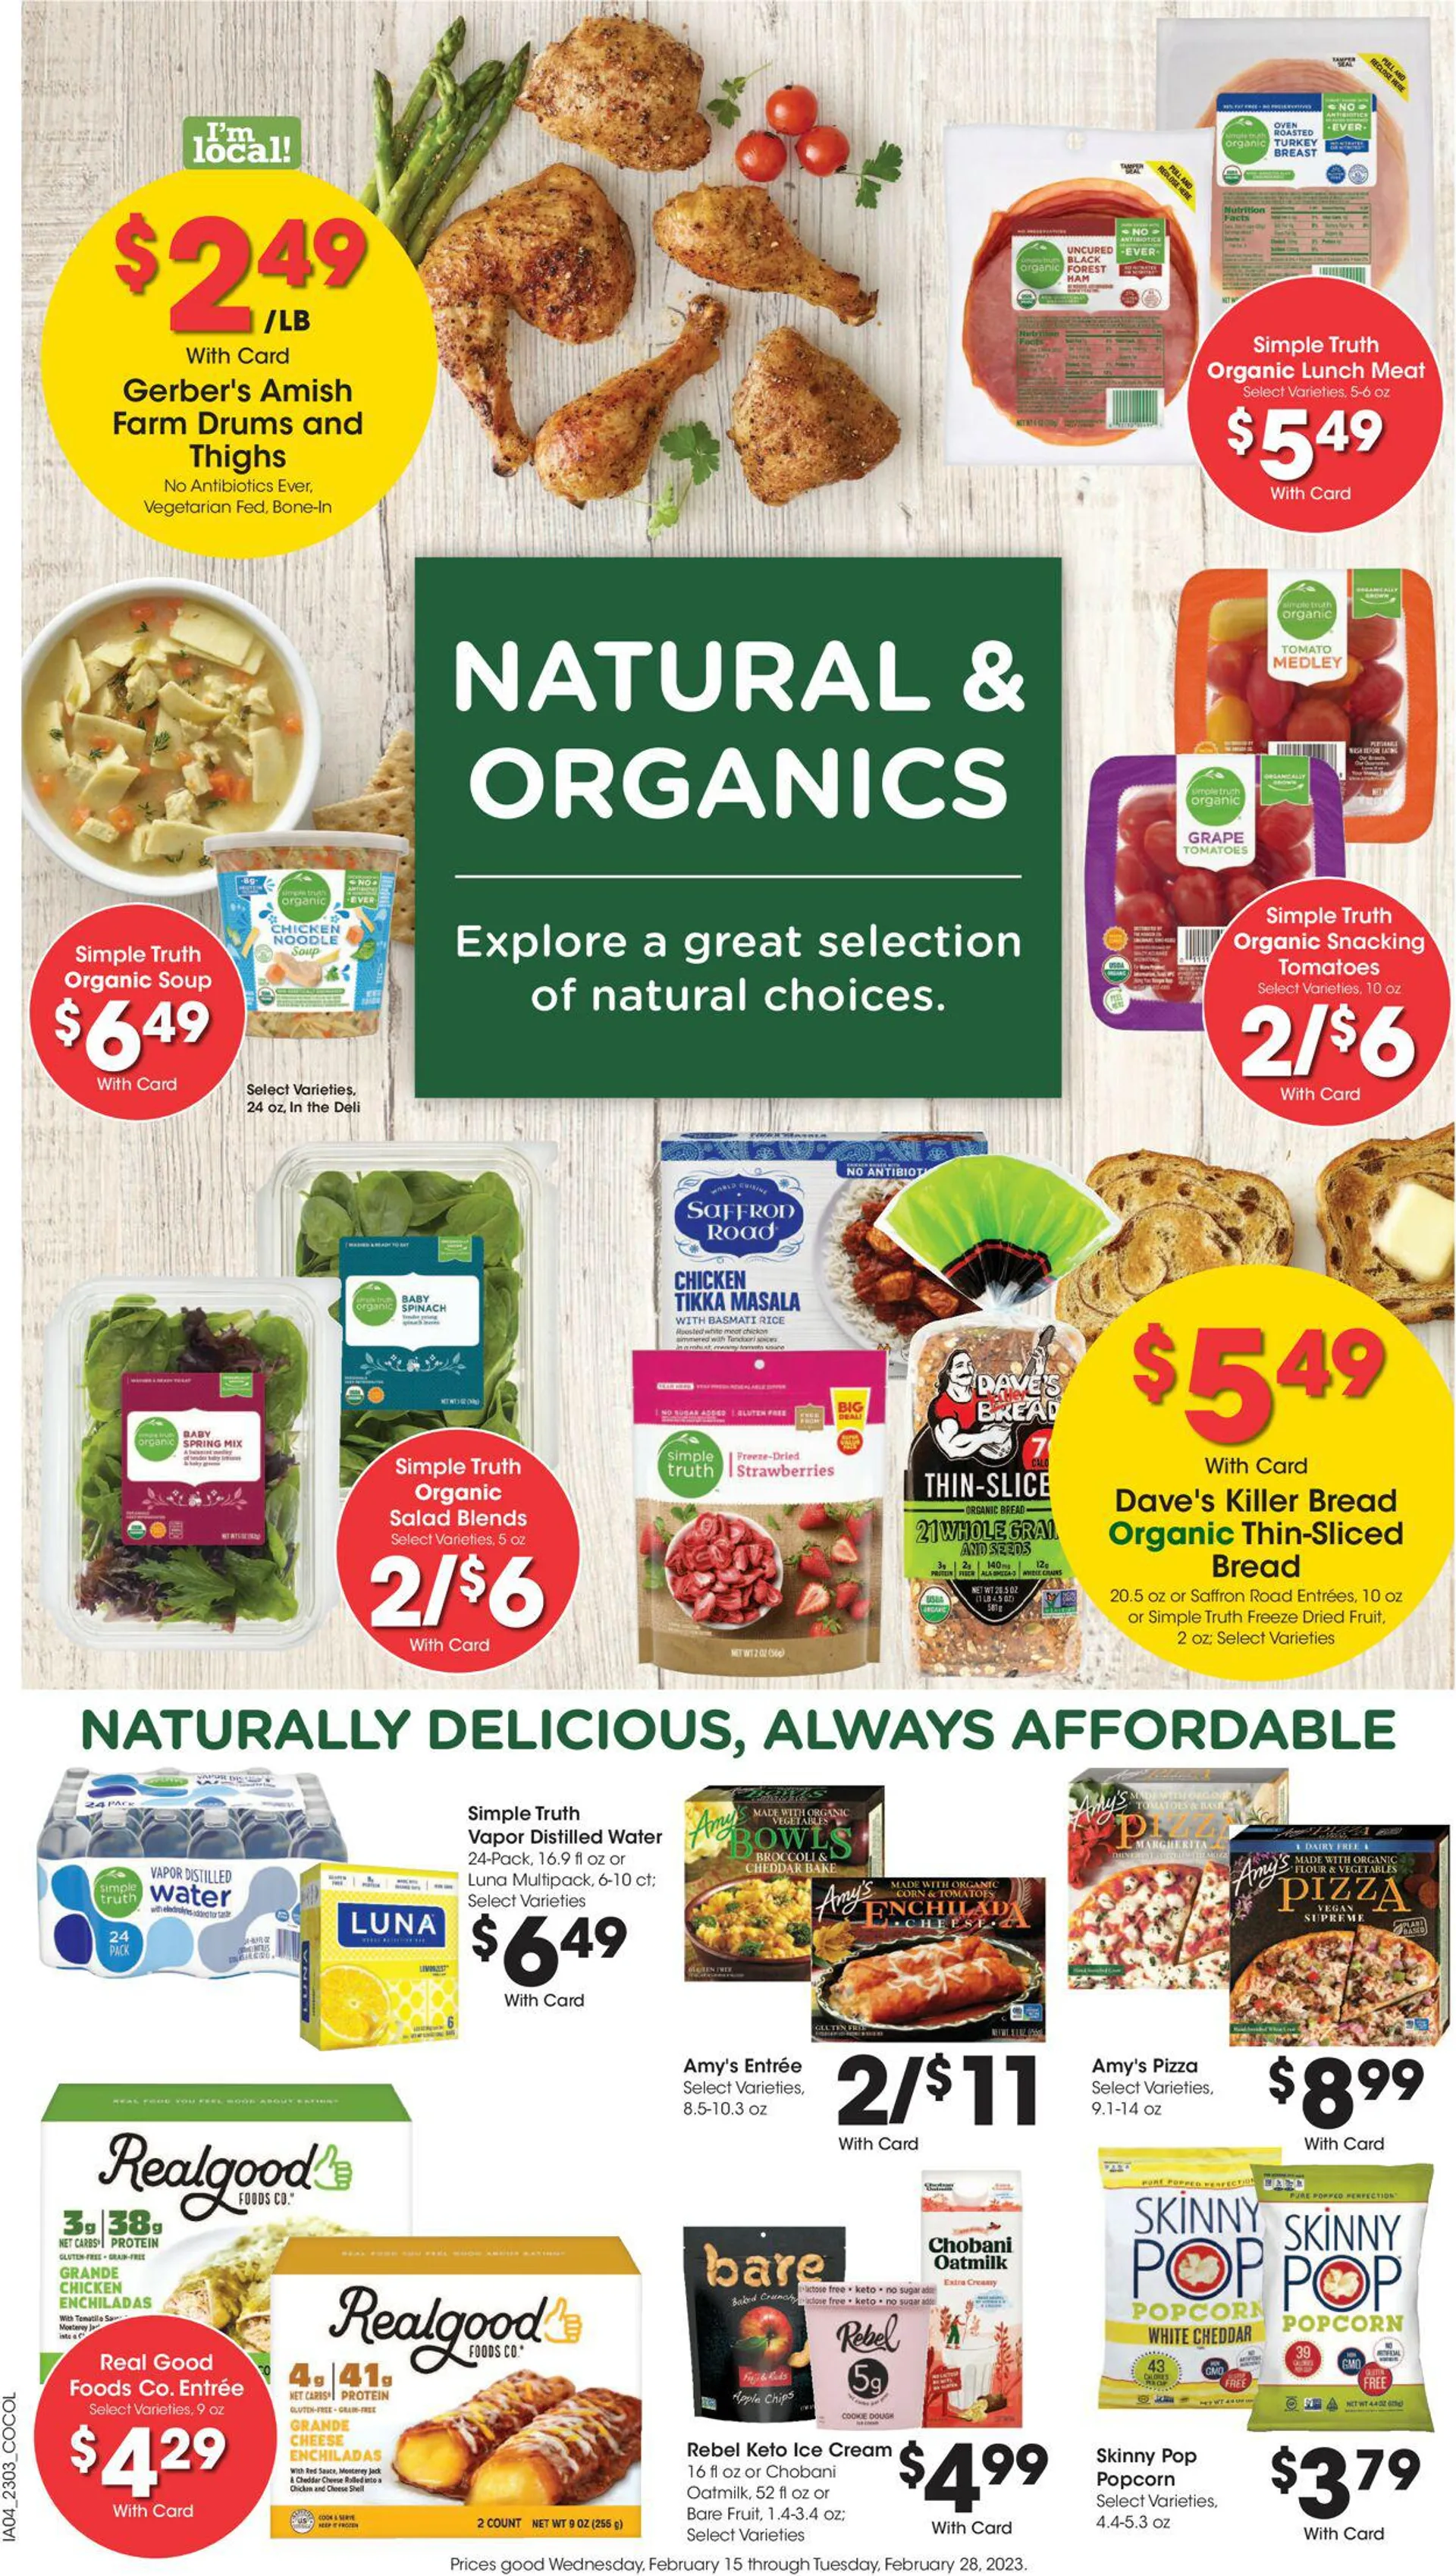 Kroger Current weekly ad - 9